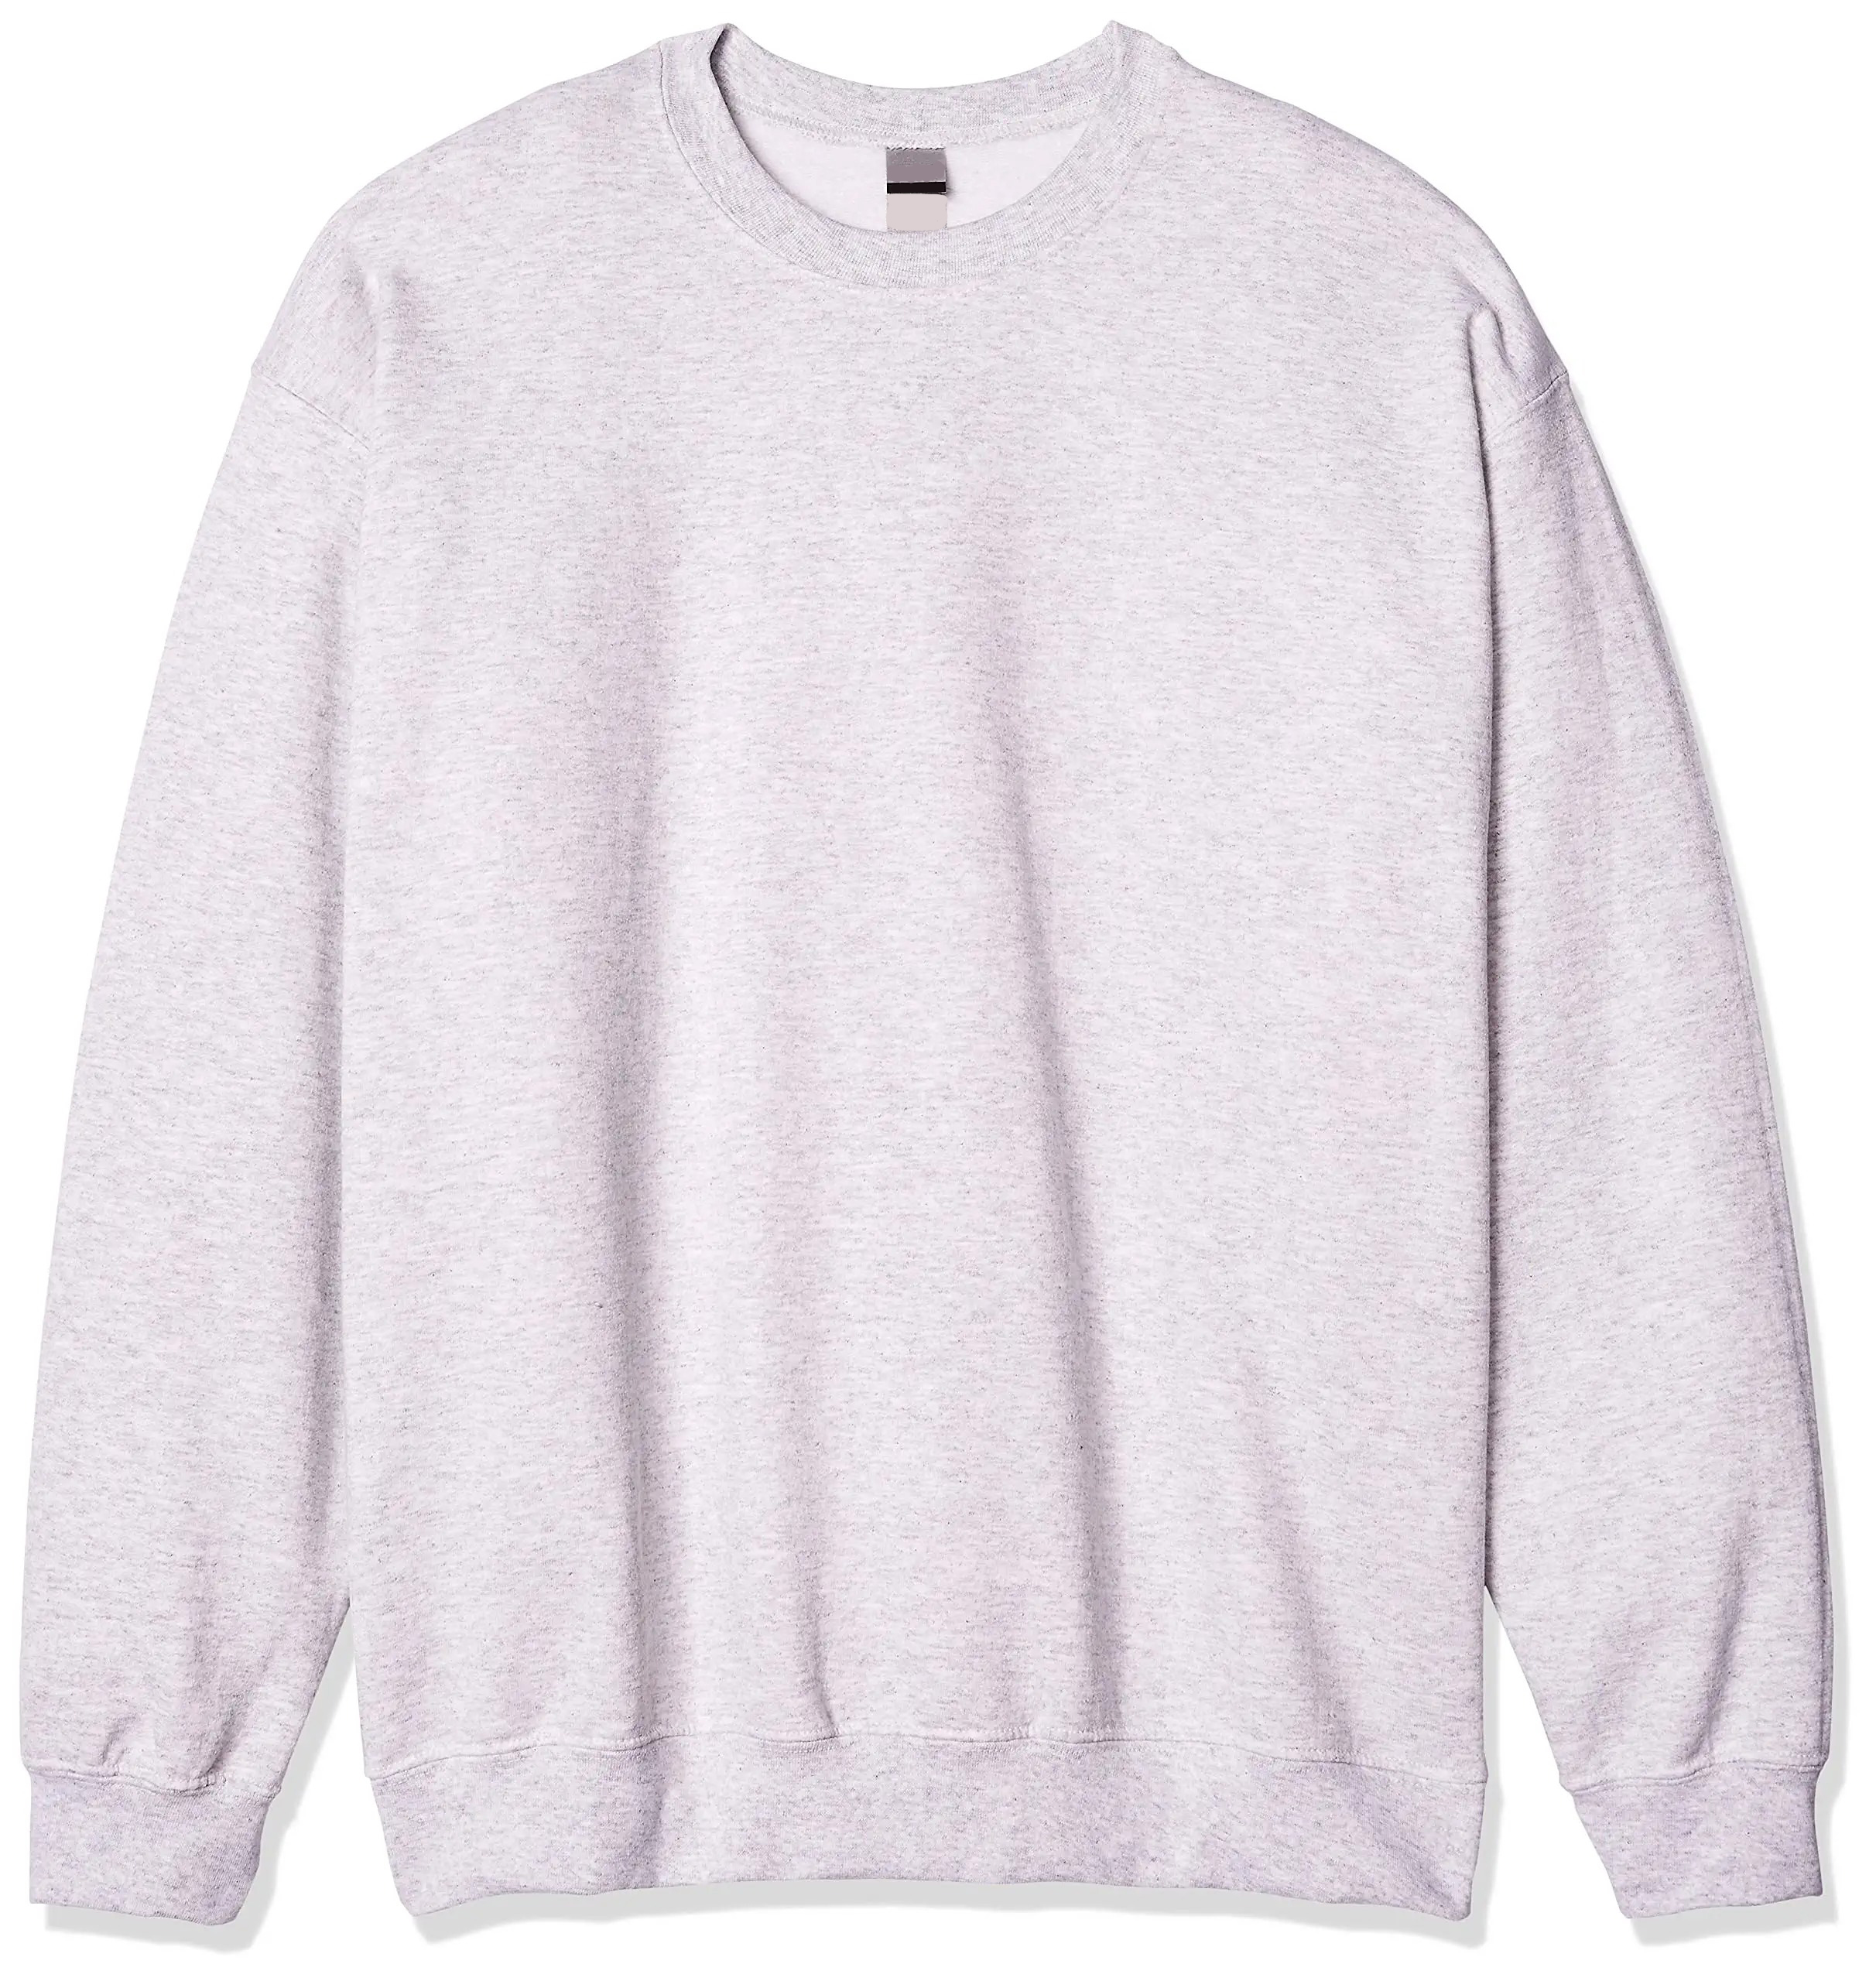 Front view of men's sweater